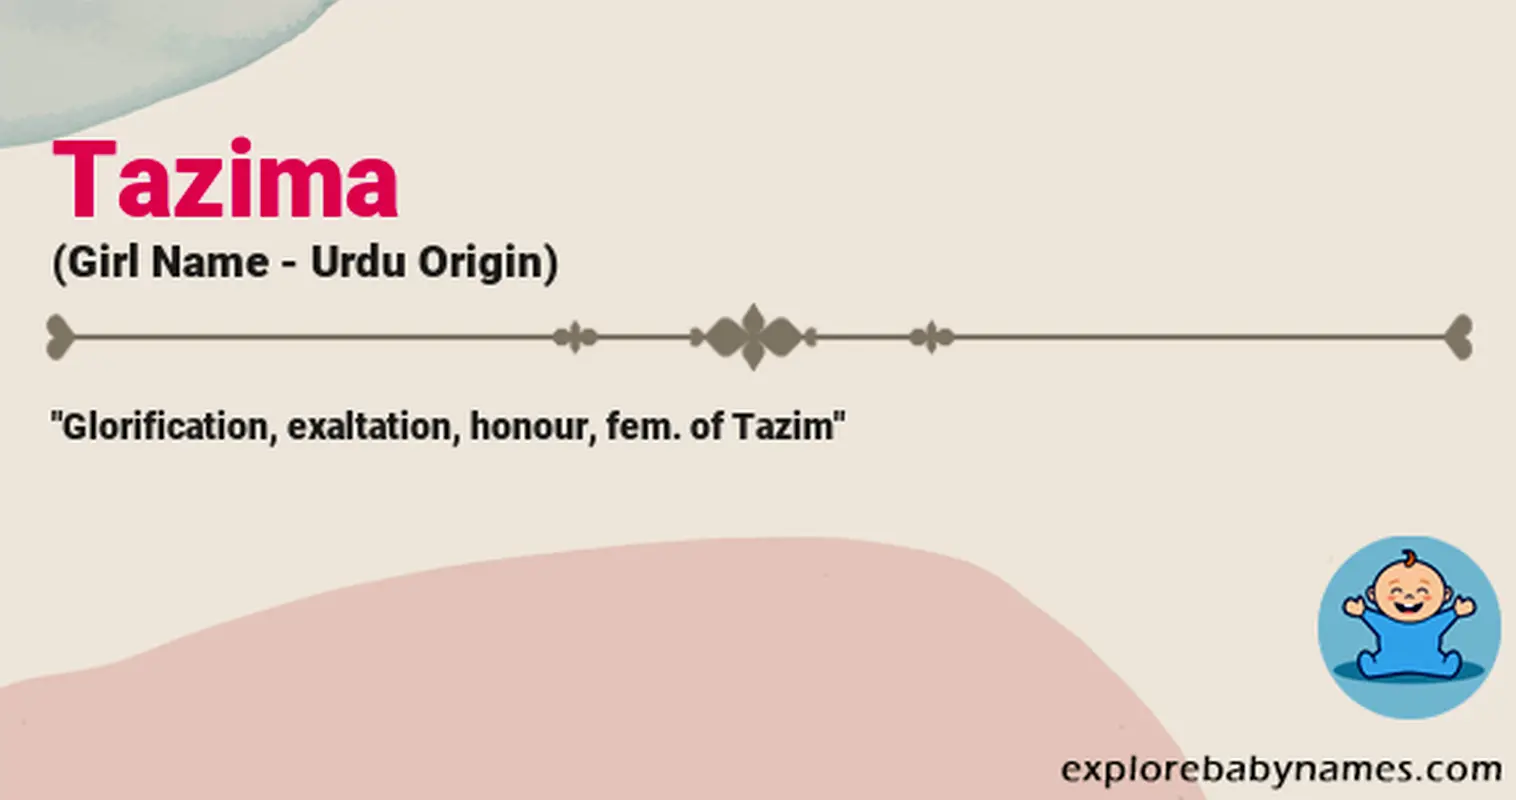 Meaning of Tazima